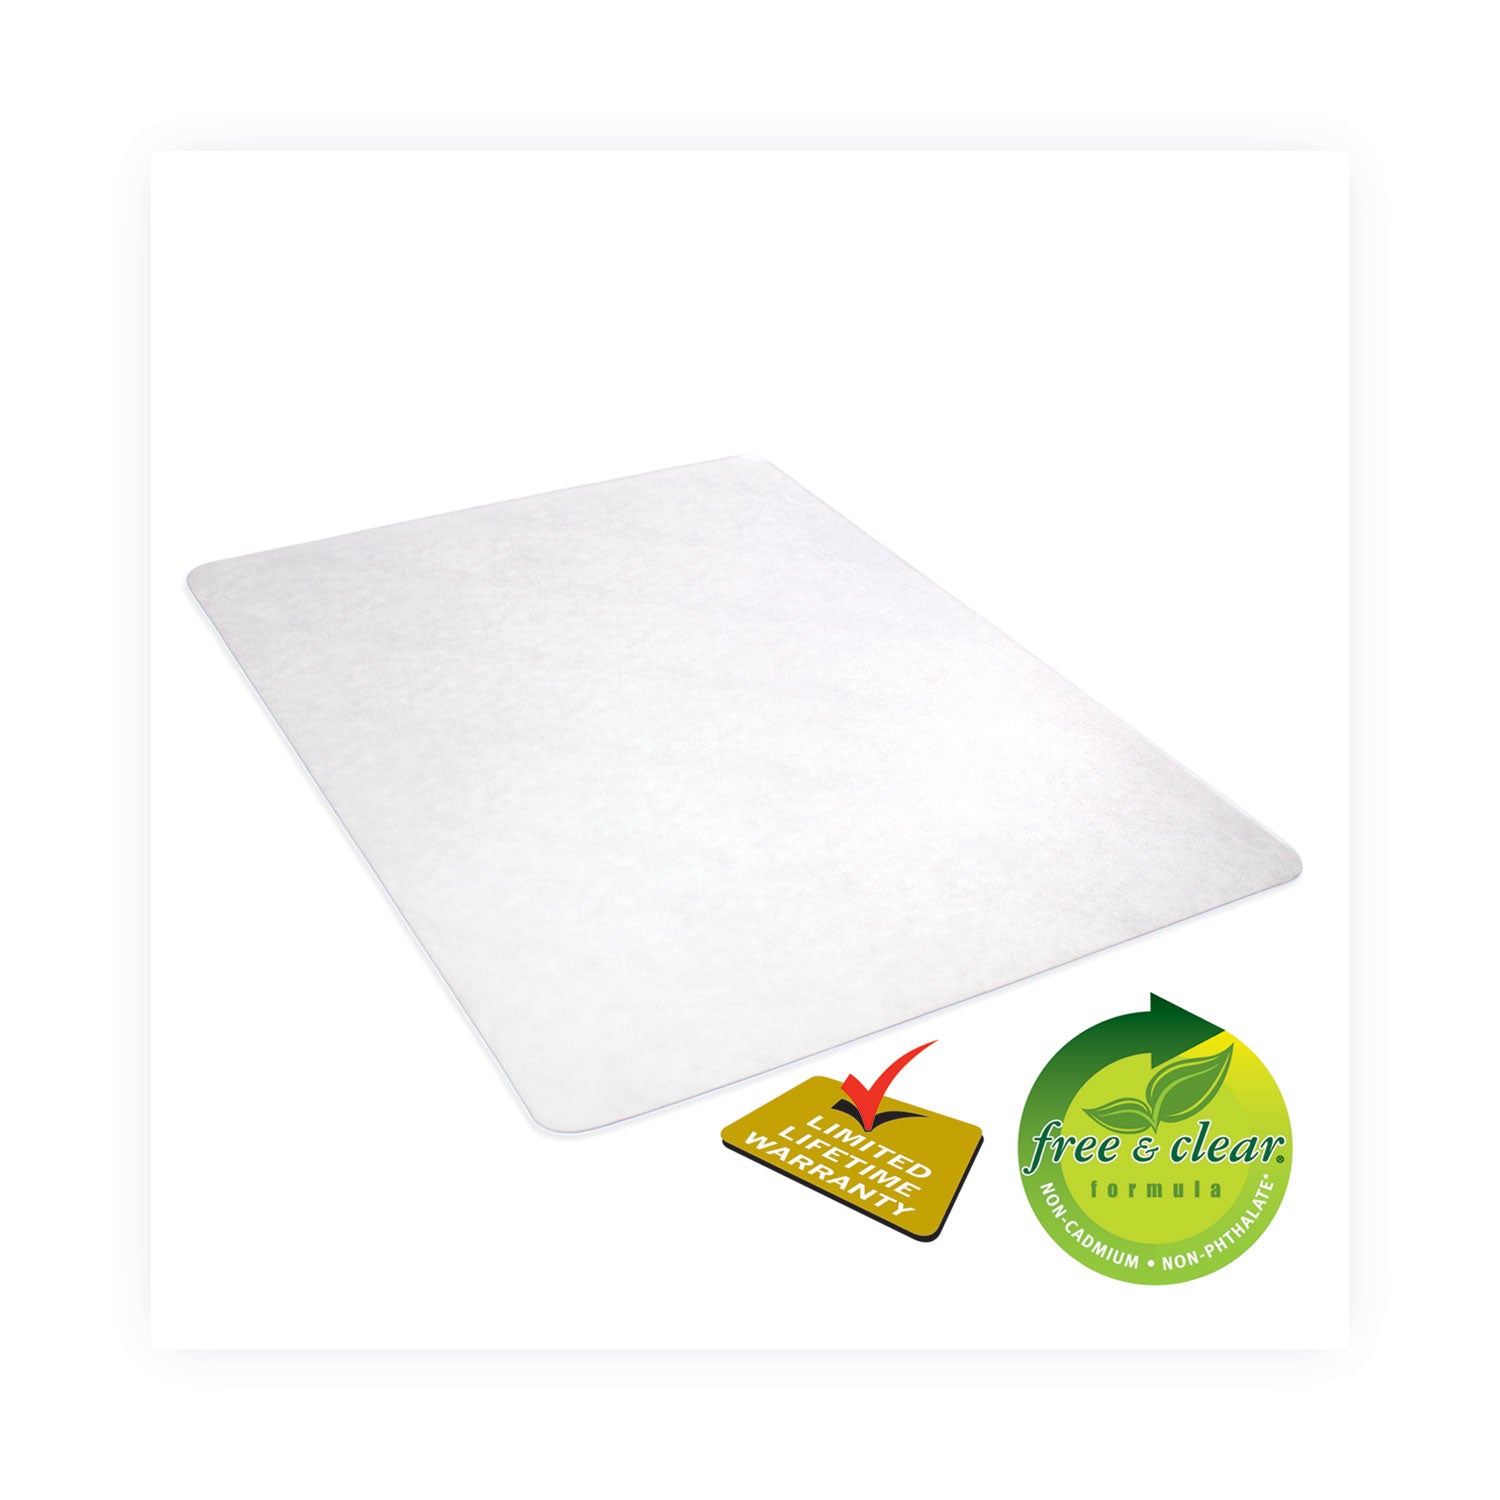 economat-all-day-use-chair-mat-for-hard-floors-rolled-packed-46-x-60-clear_defcm2e442fcom - 5